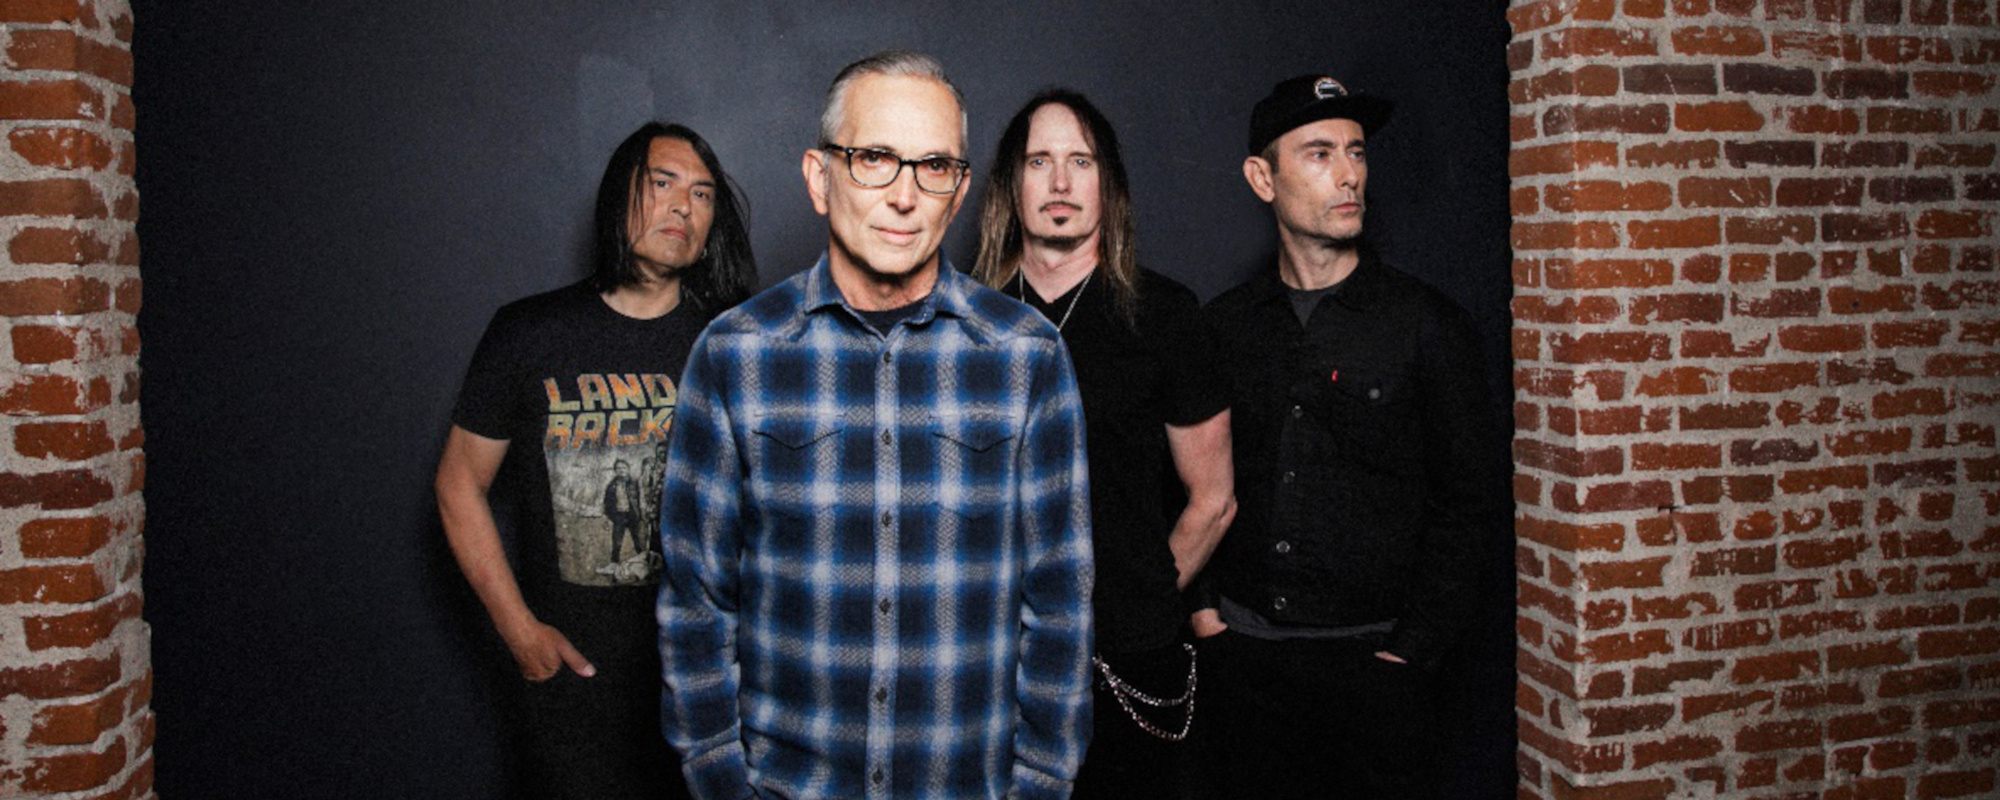 Behind the Drunk-Inspired Band Name “Everclear”